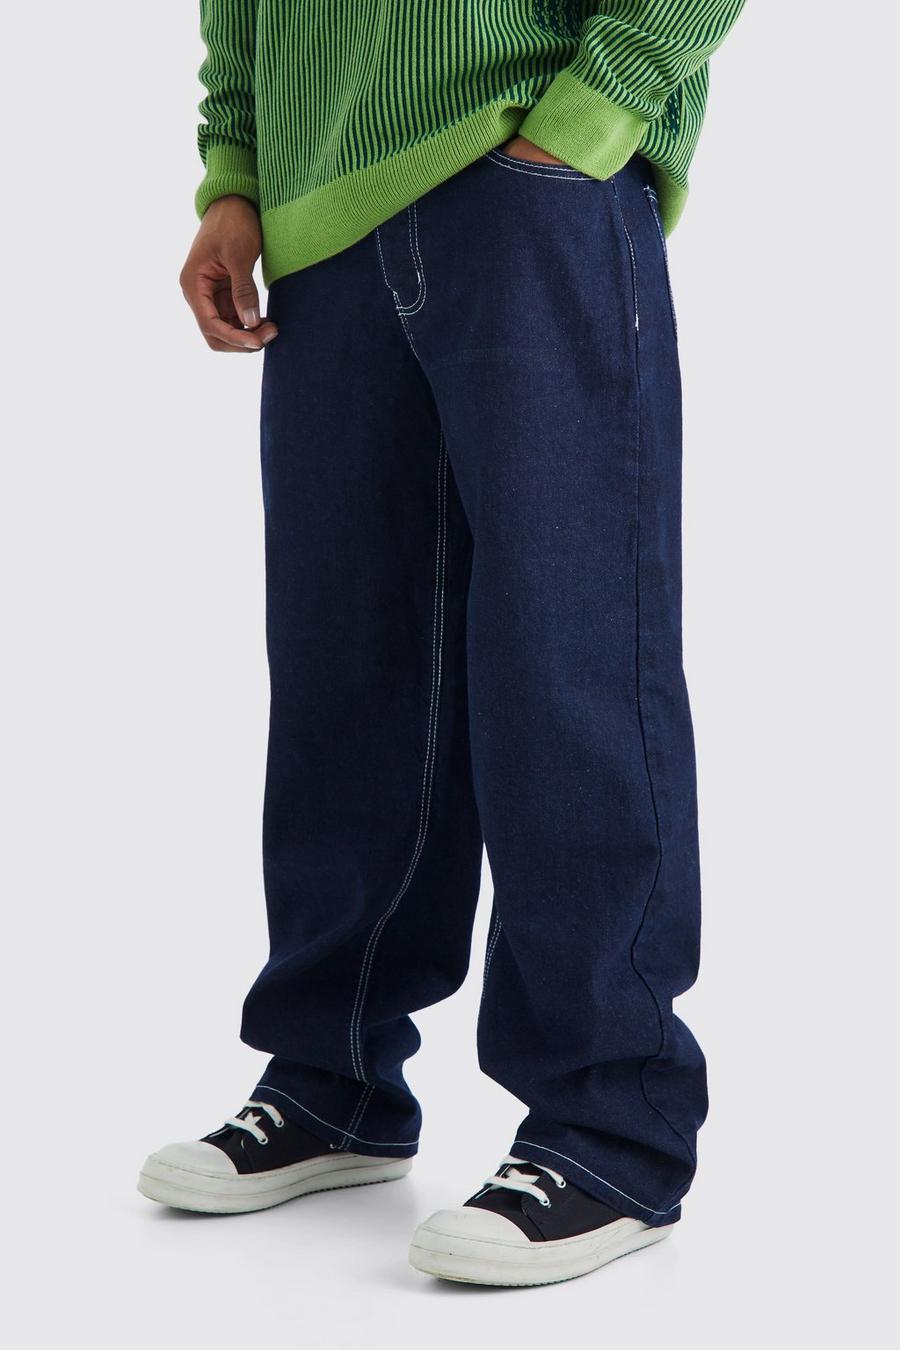 Indigo Baggy Fit Jeans With Contrast Stitch